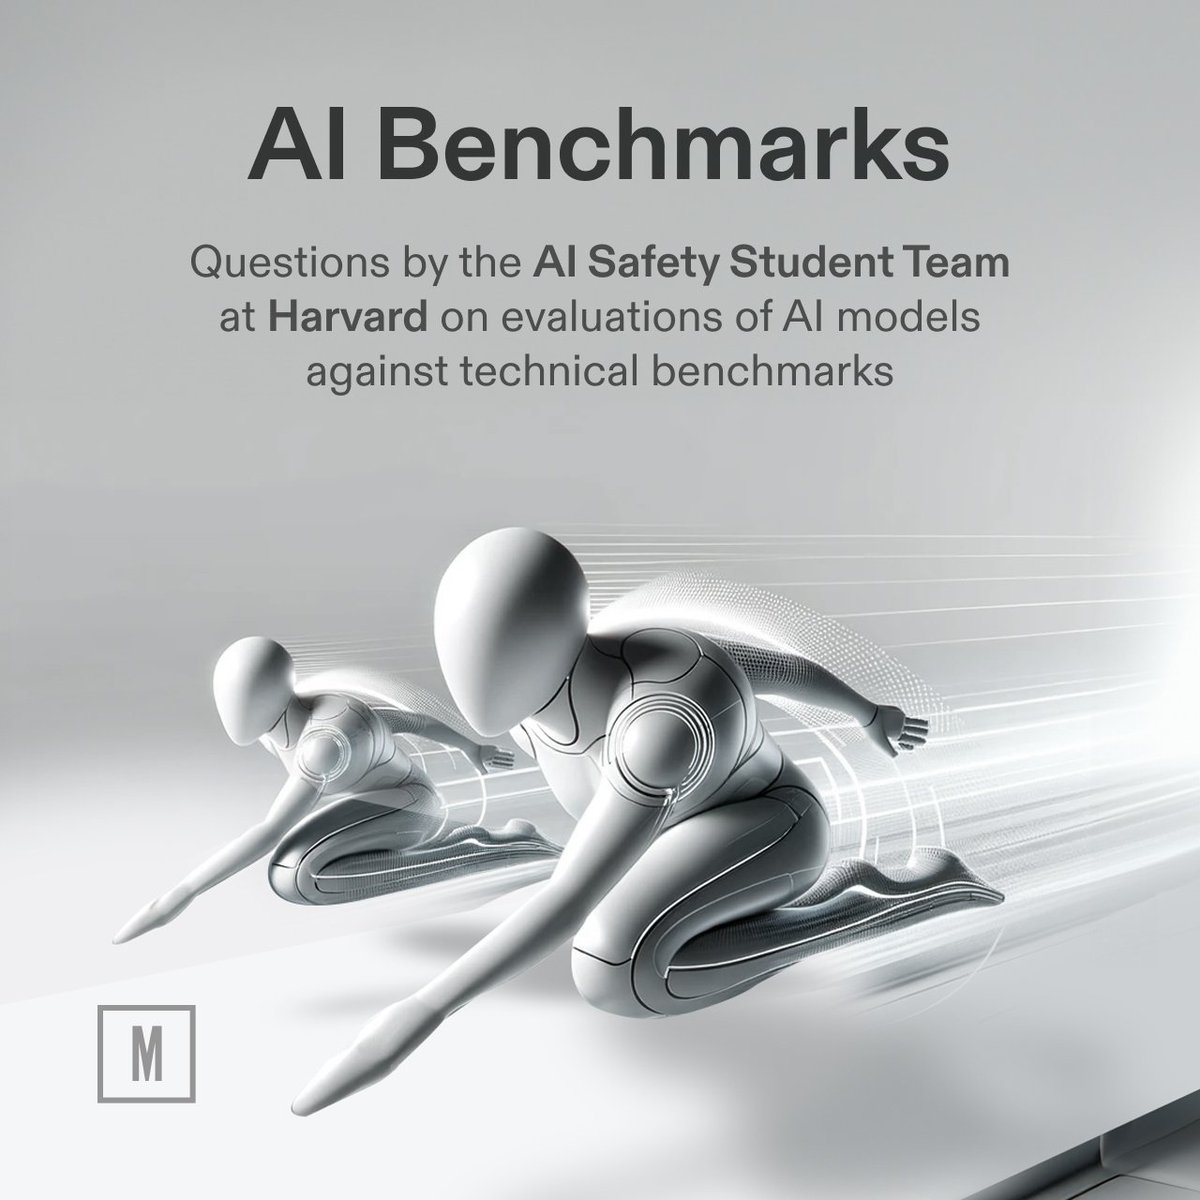 How capable will top AI models be in 2025? Forecast: • LLM agents' autonomous replication & adaptation (ARA) abilities • model performance on benchmarks like GPQA & GAIA — in AI Benchmarks, a collaboration with the AI Safety Student Team at Harvard: metaculus.com/project/3054/